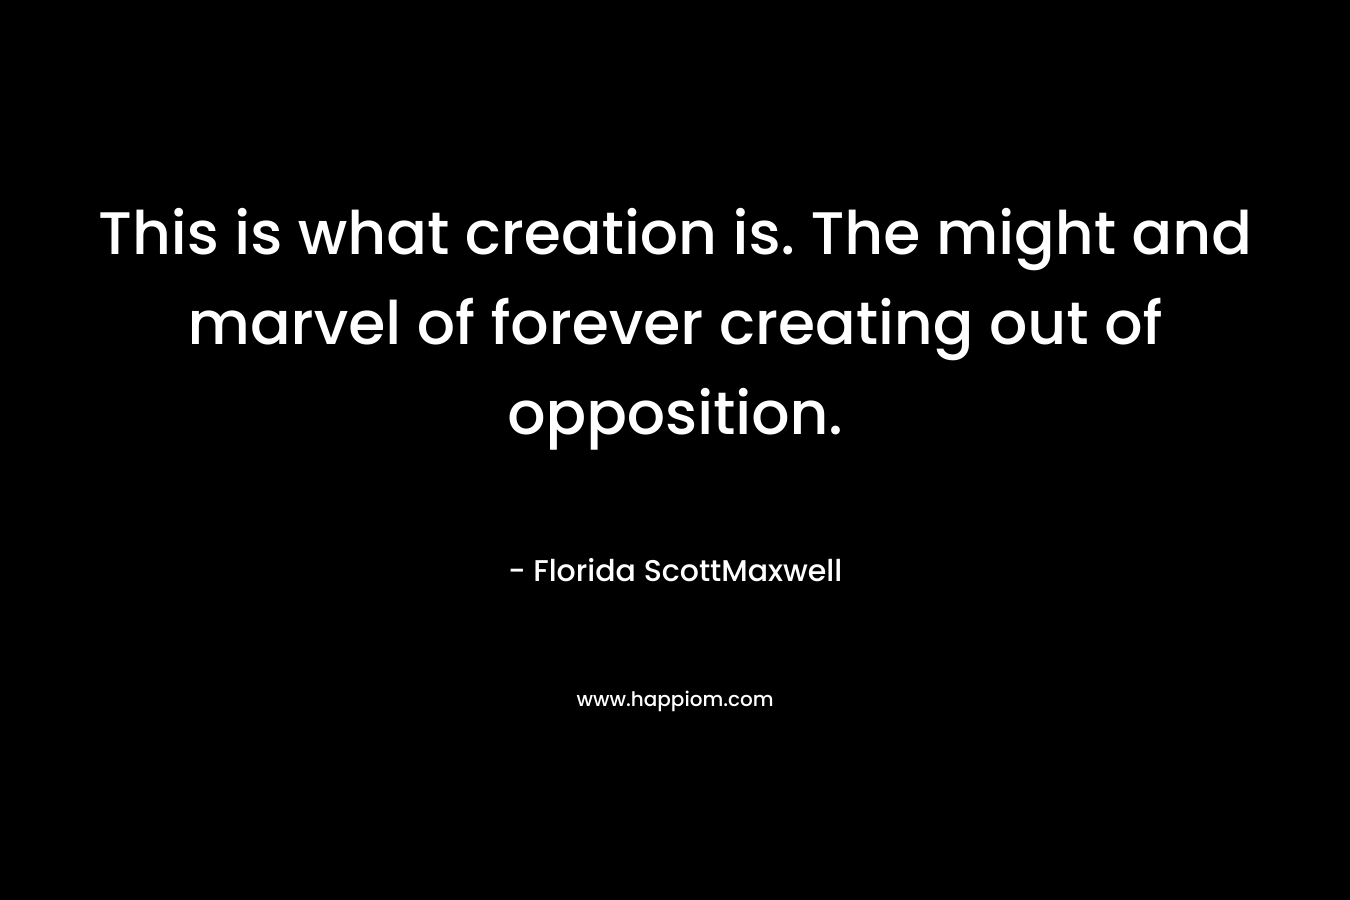 This is what creation is. The might and marvel of forever creating out of opposition. – Florida ScottMaxwell